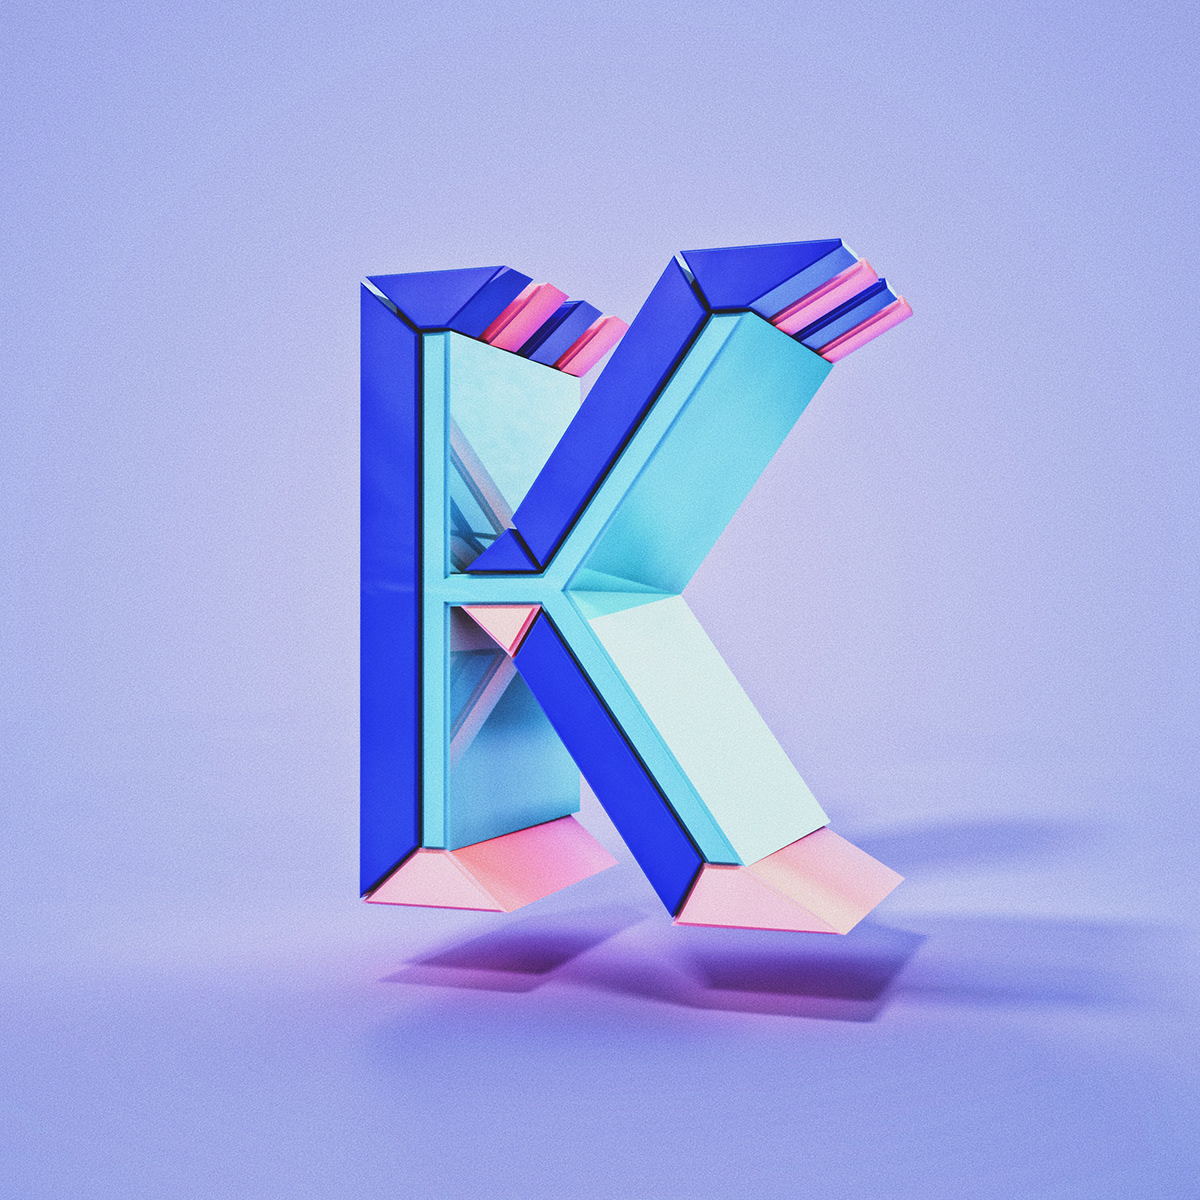 36 Days of Type - 3D Edition 2018.